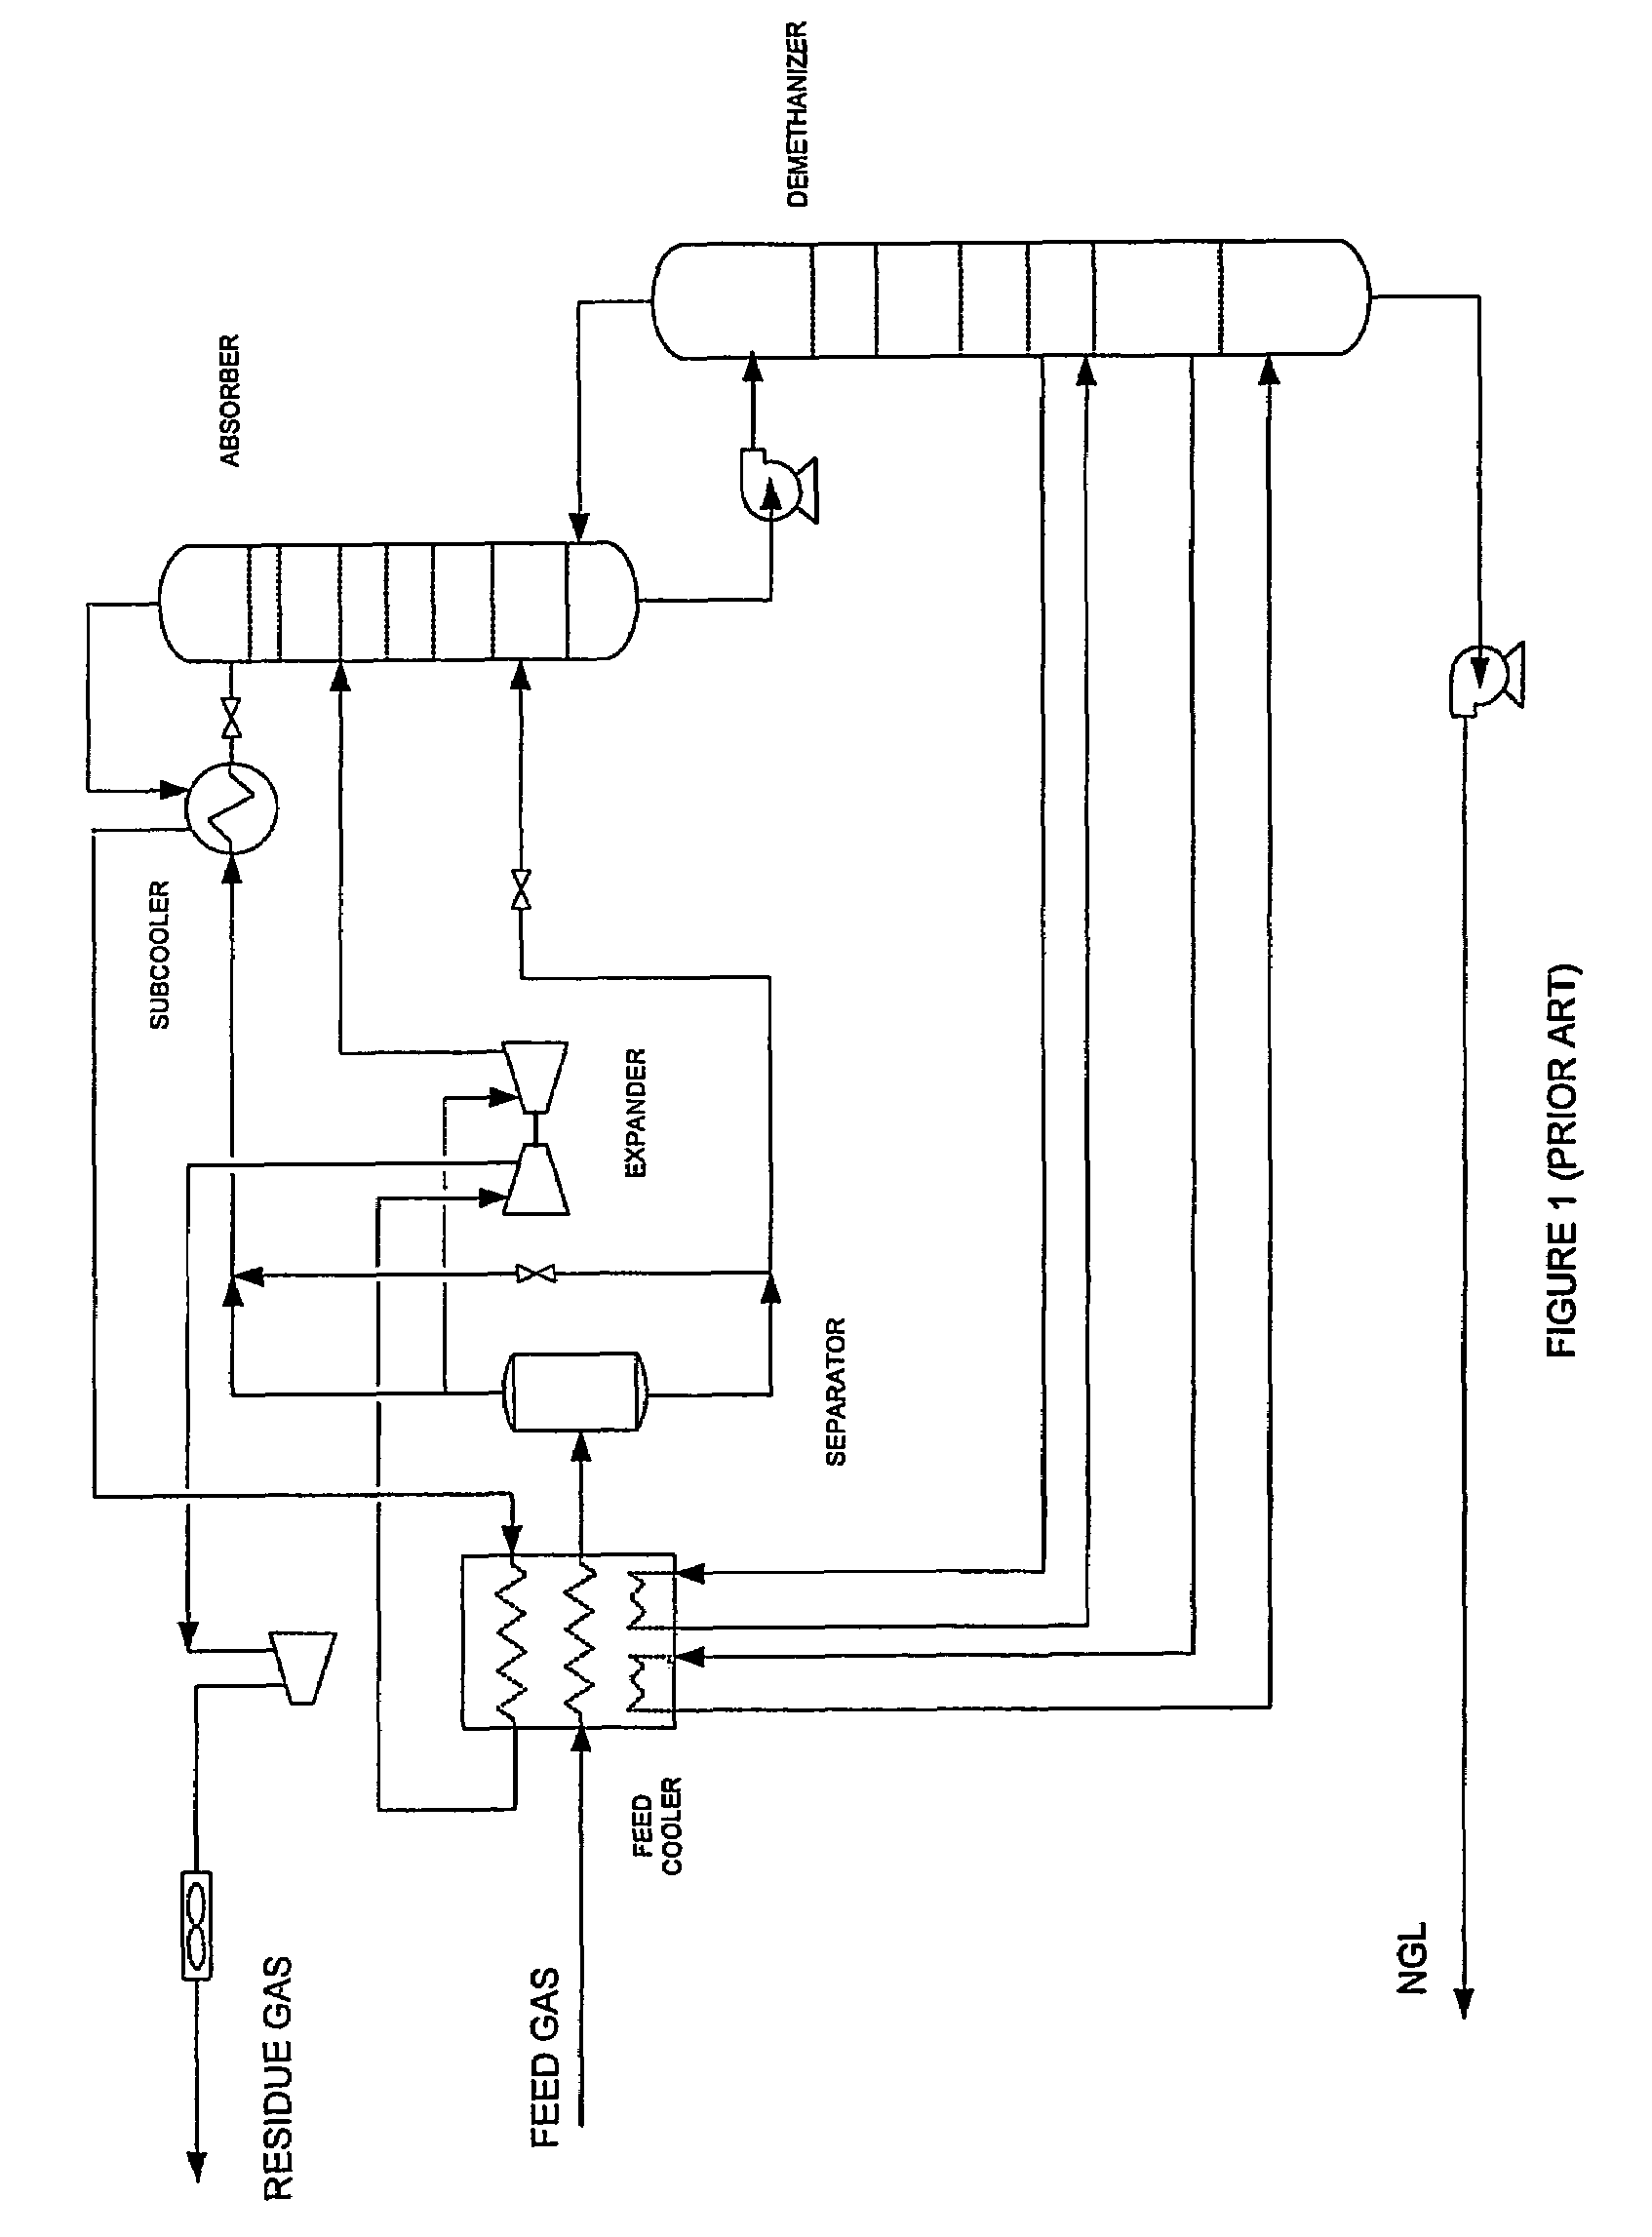 Configuration and process for NGL recovery using a subcooled absorption reflux process